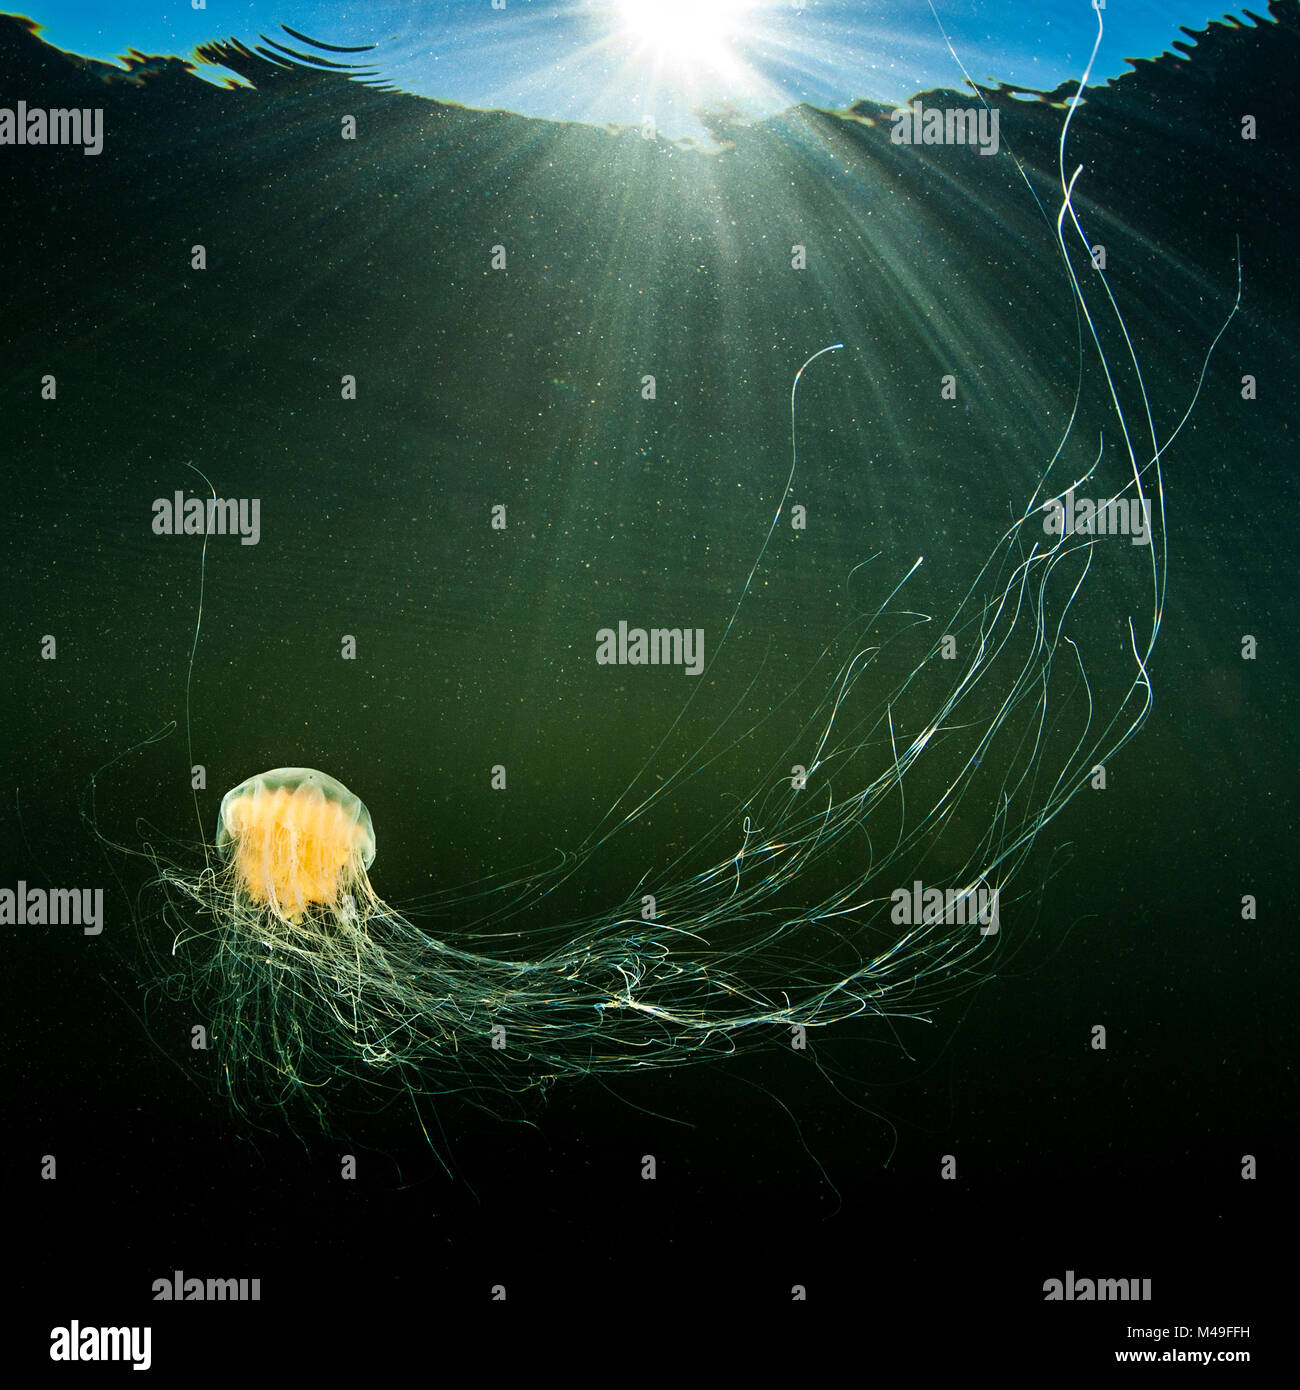 Lion's mane jellyfish (Cyanea capillata) with feeding tentacles spread swimming in the sun in shallow water. Gulen, Norway. North East Atlantic Ocean. Stock Photo